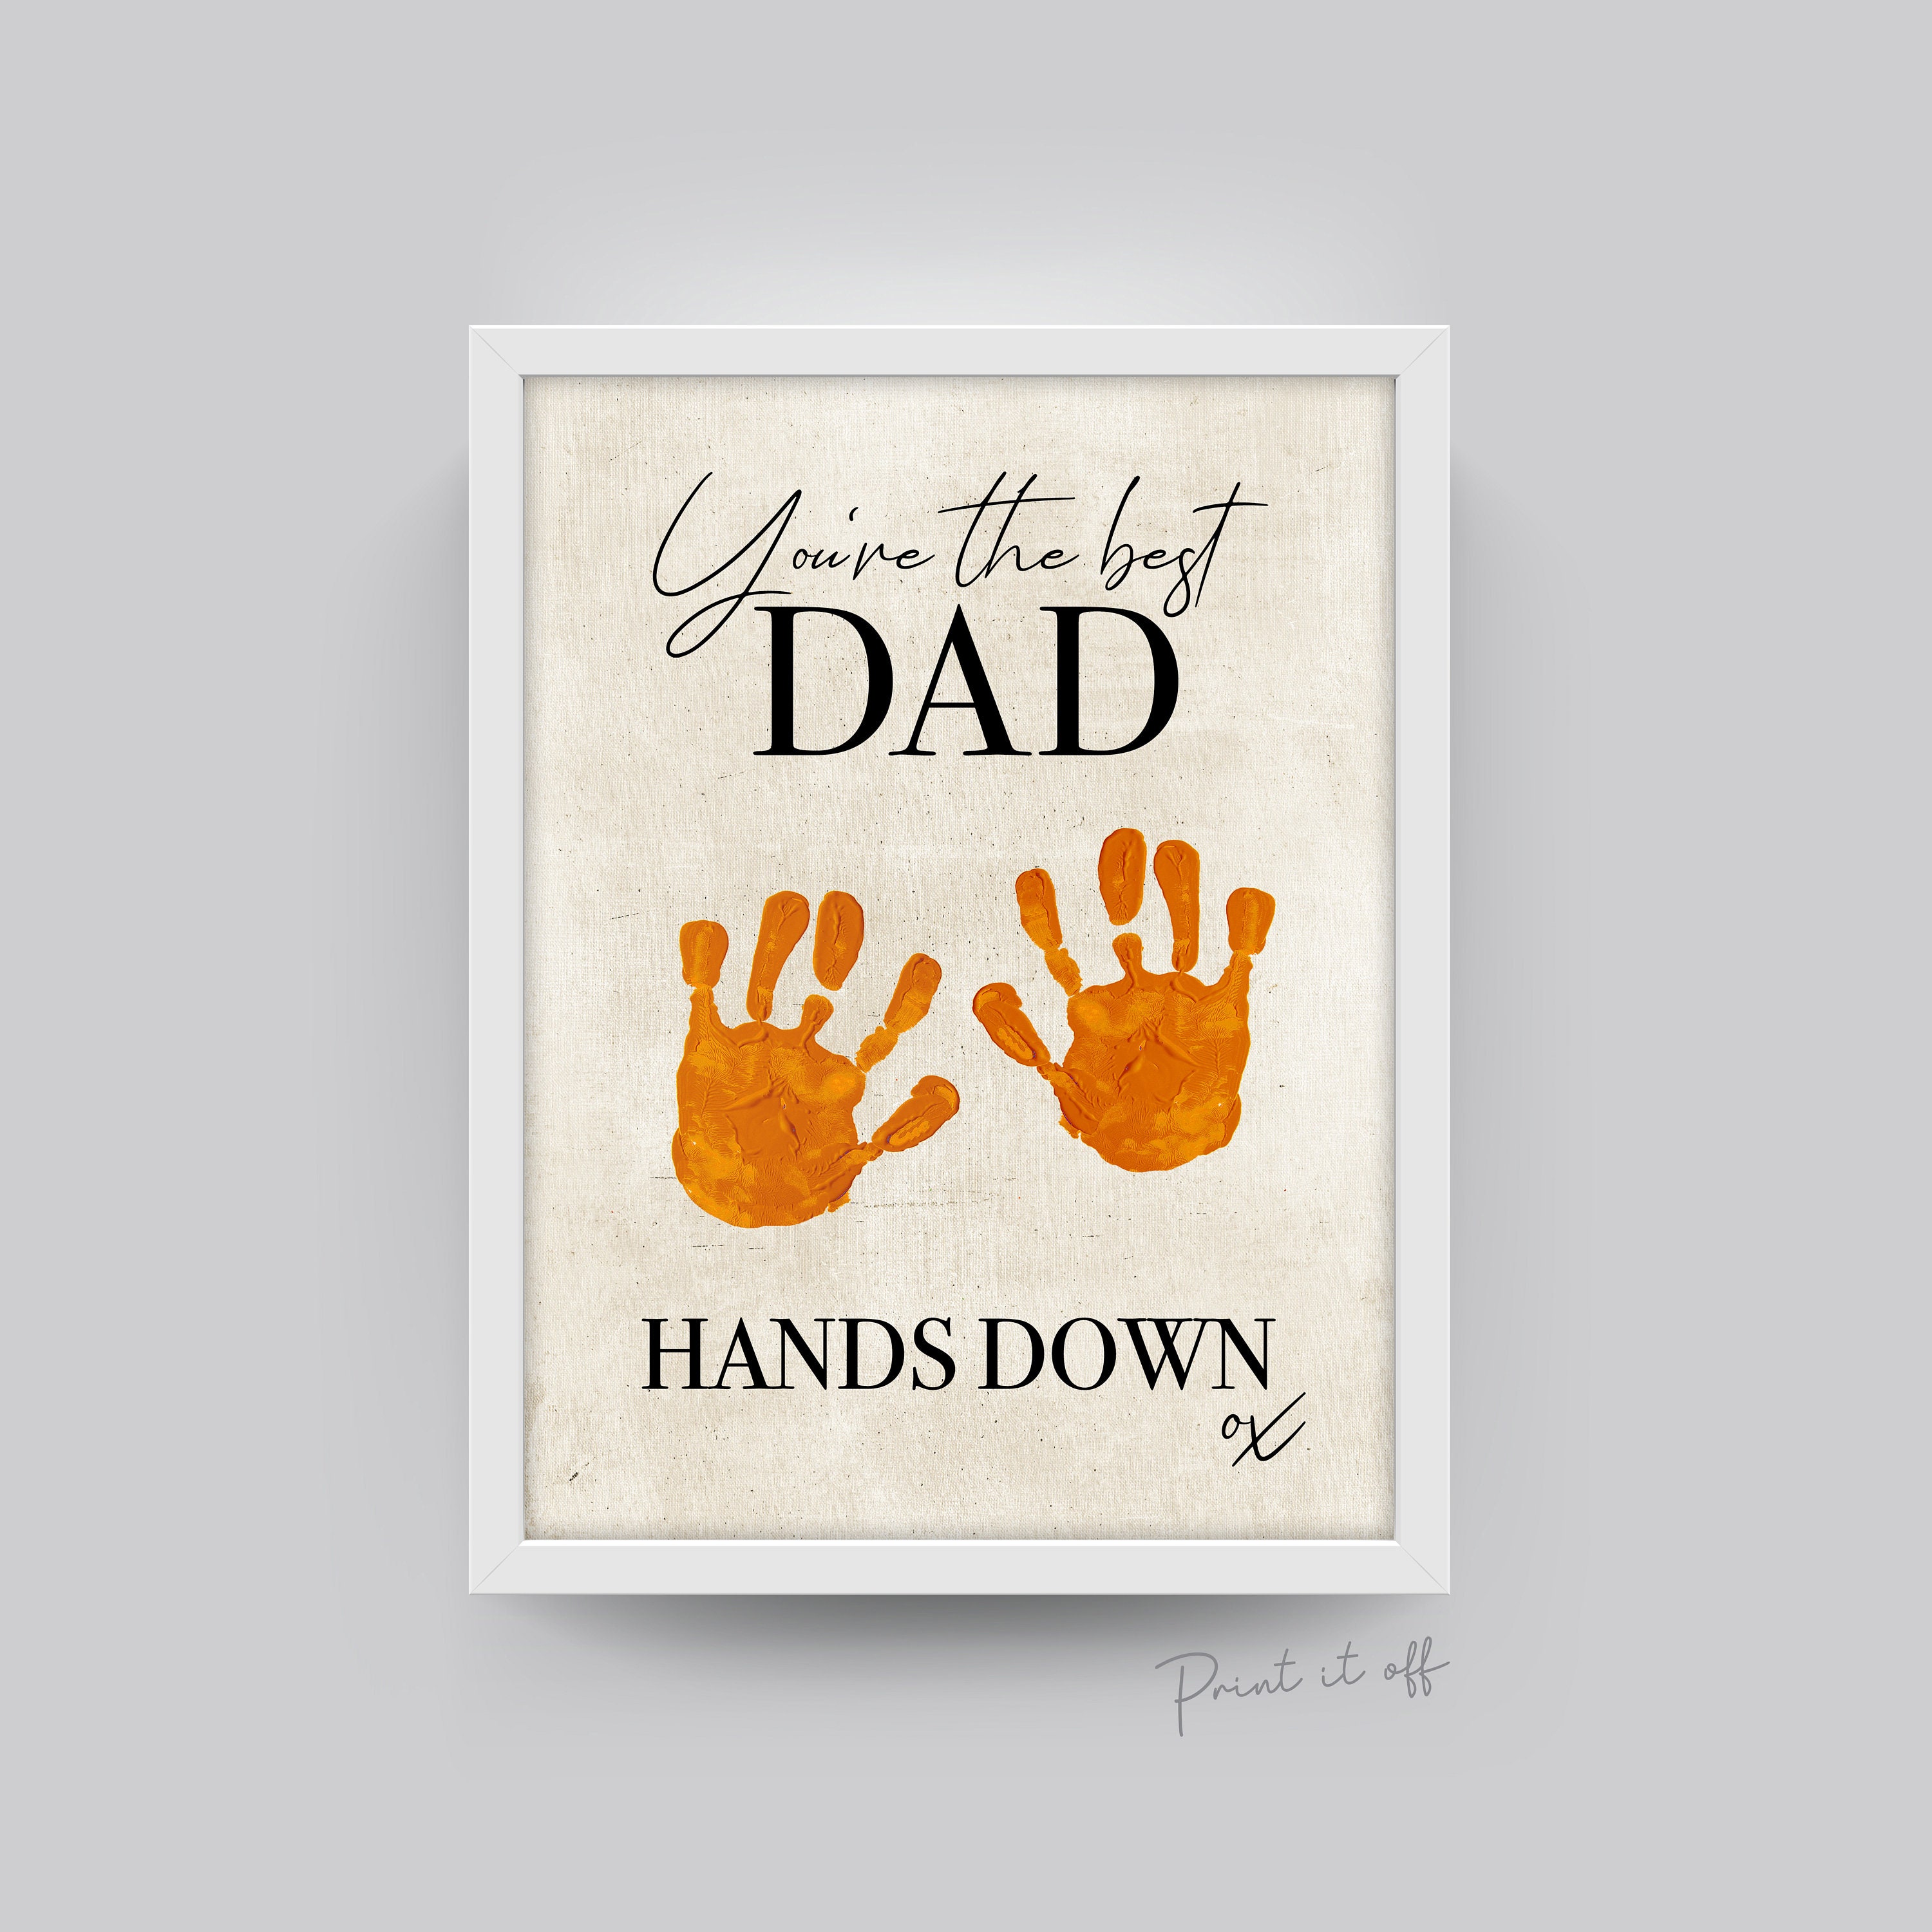 handprint-art-craft-best-dad-hands-down-father-s-day-atelier-yuwa-ciao-jp